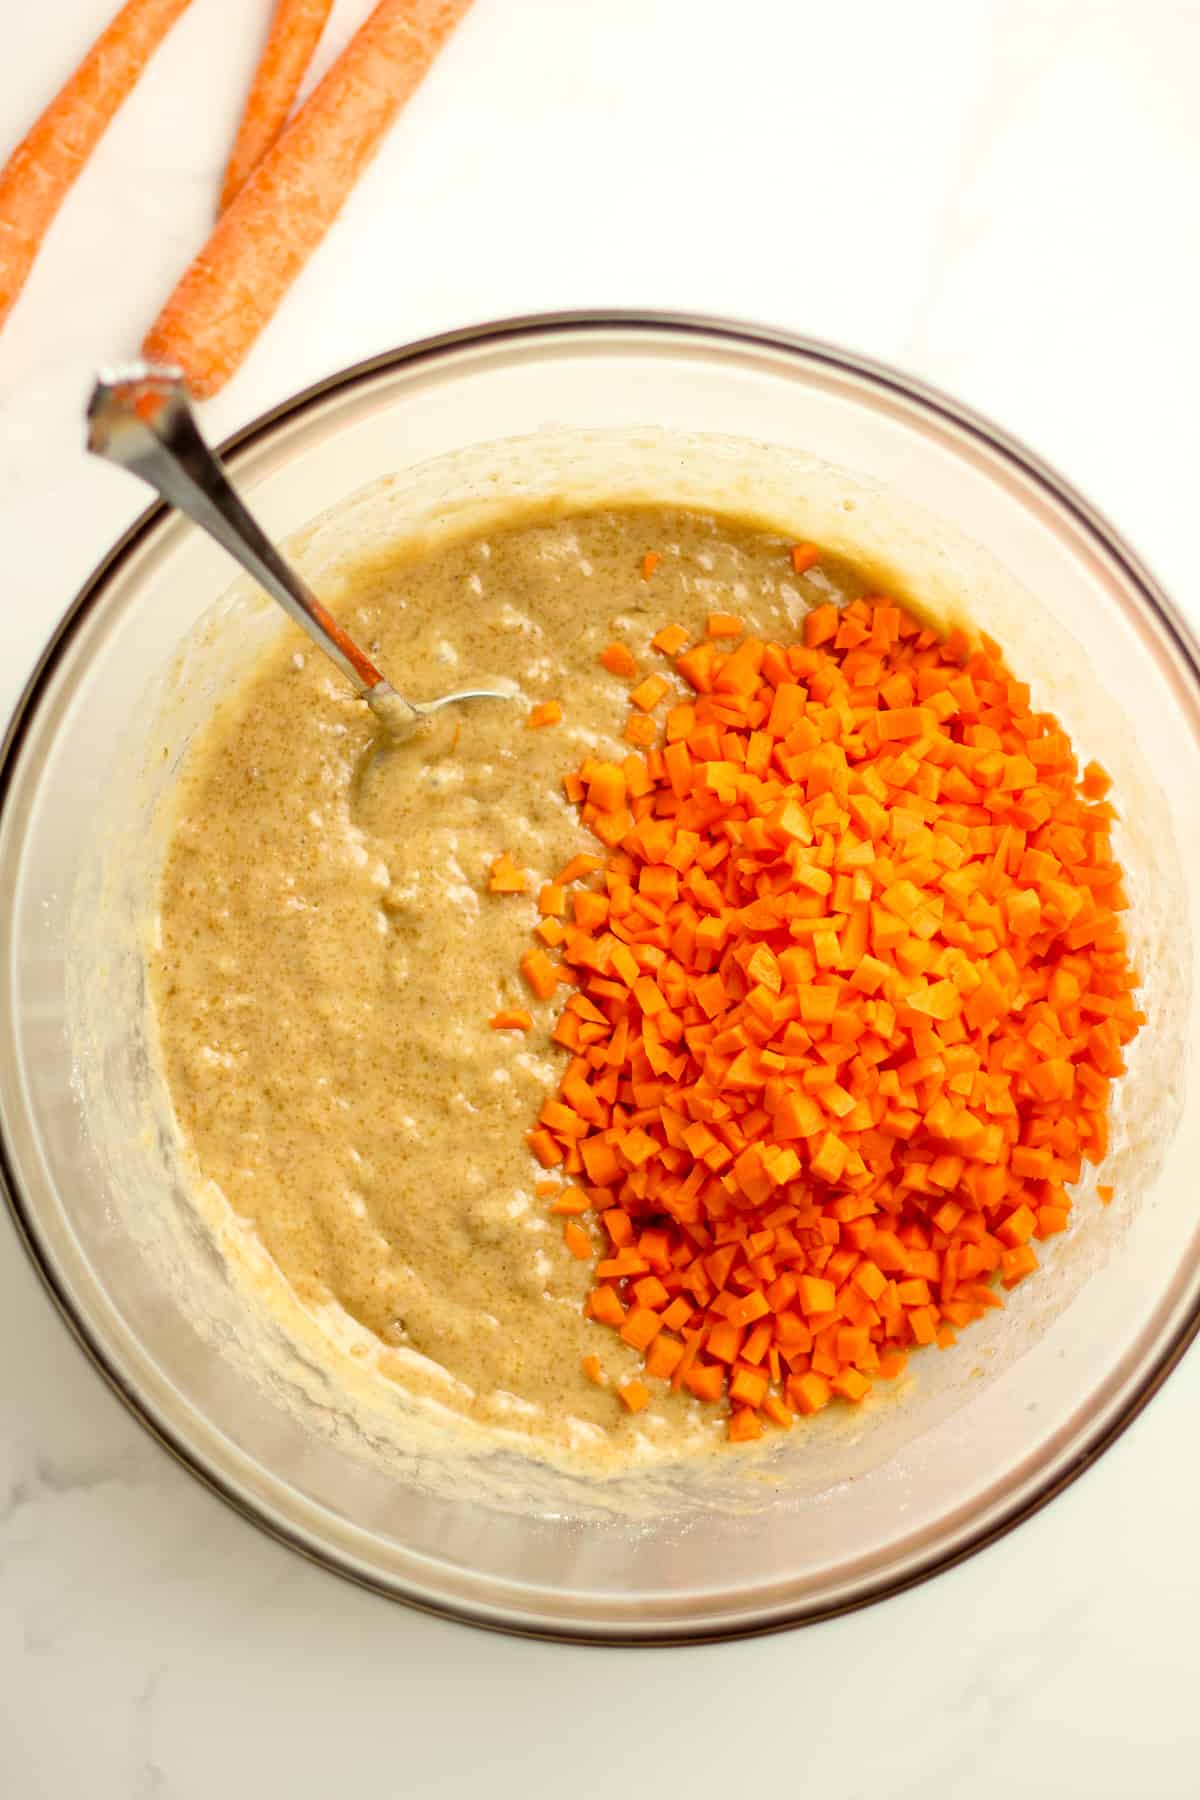 A bowl of the carrot cake batter with the diced carrots, with a spoon.